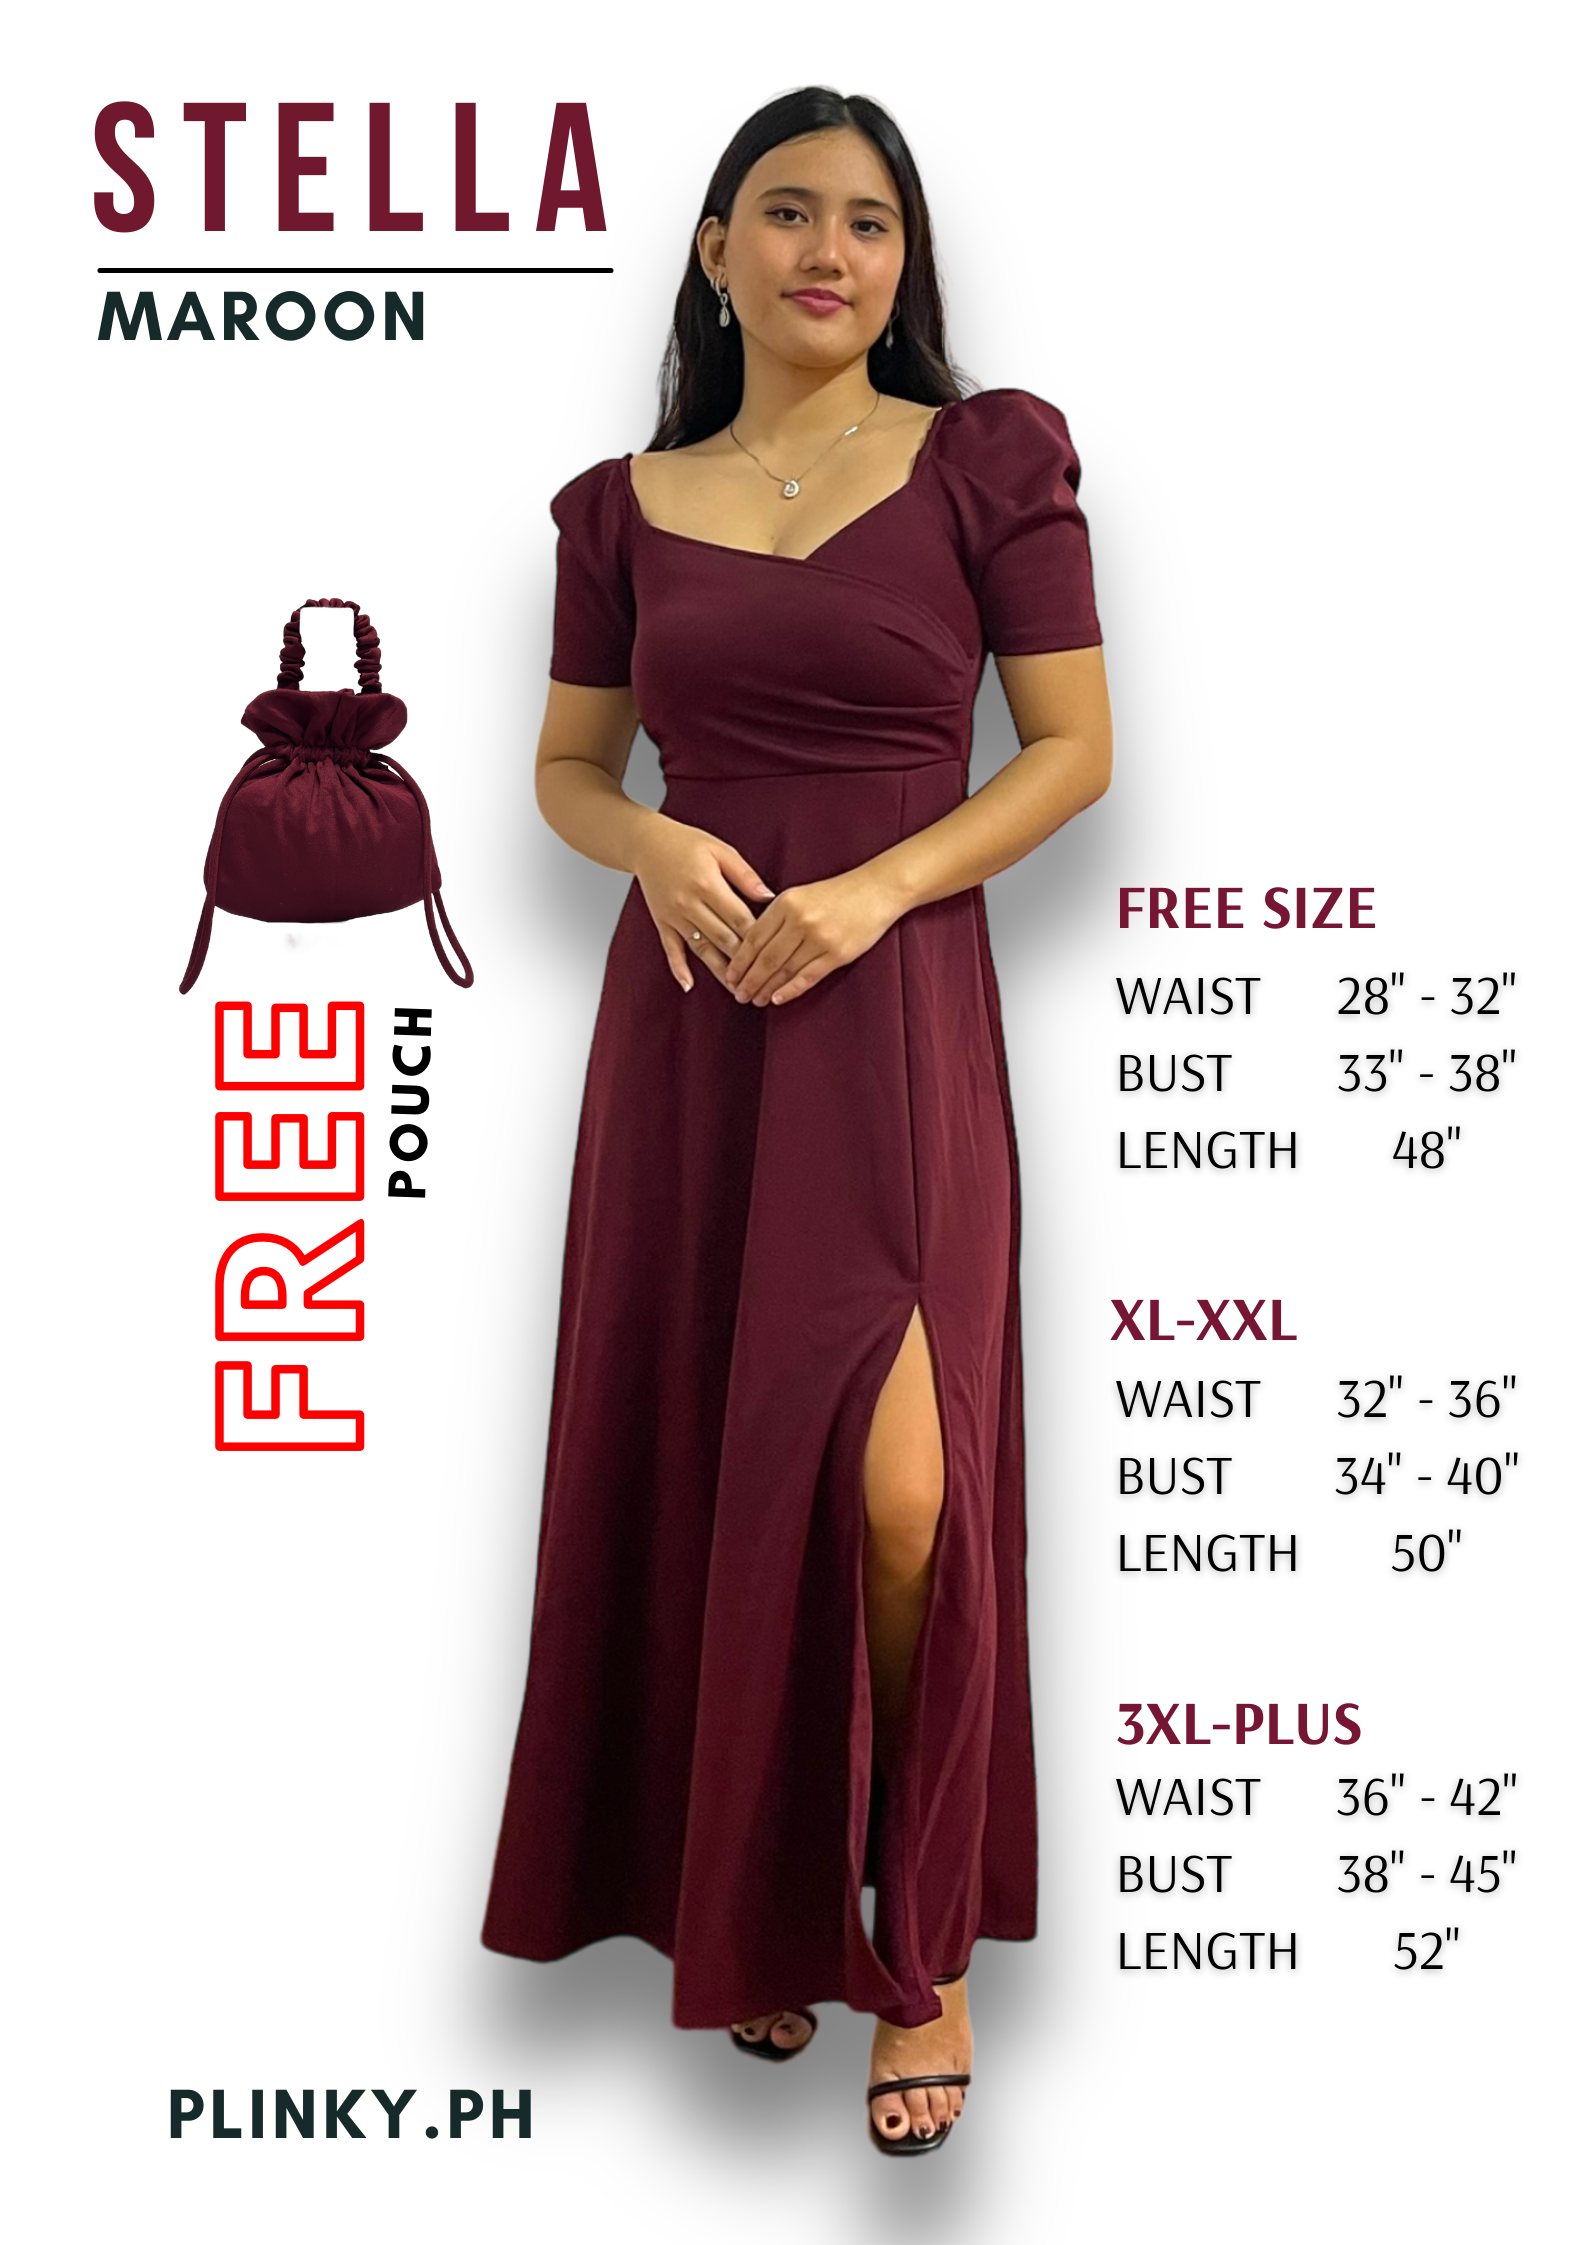 Extended Plus Size Women's Formal & Occasions Dresses (34-40